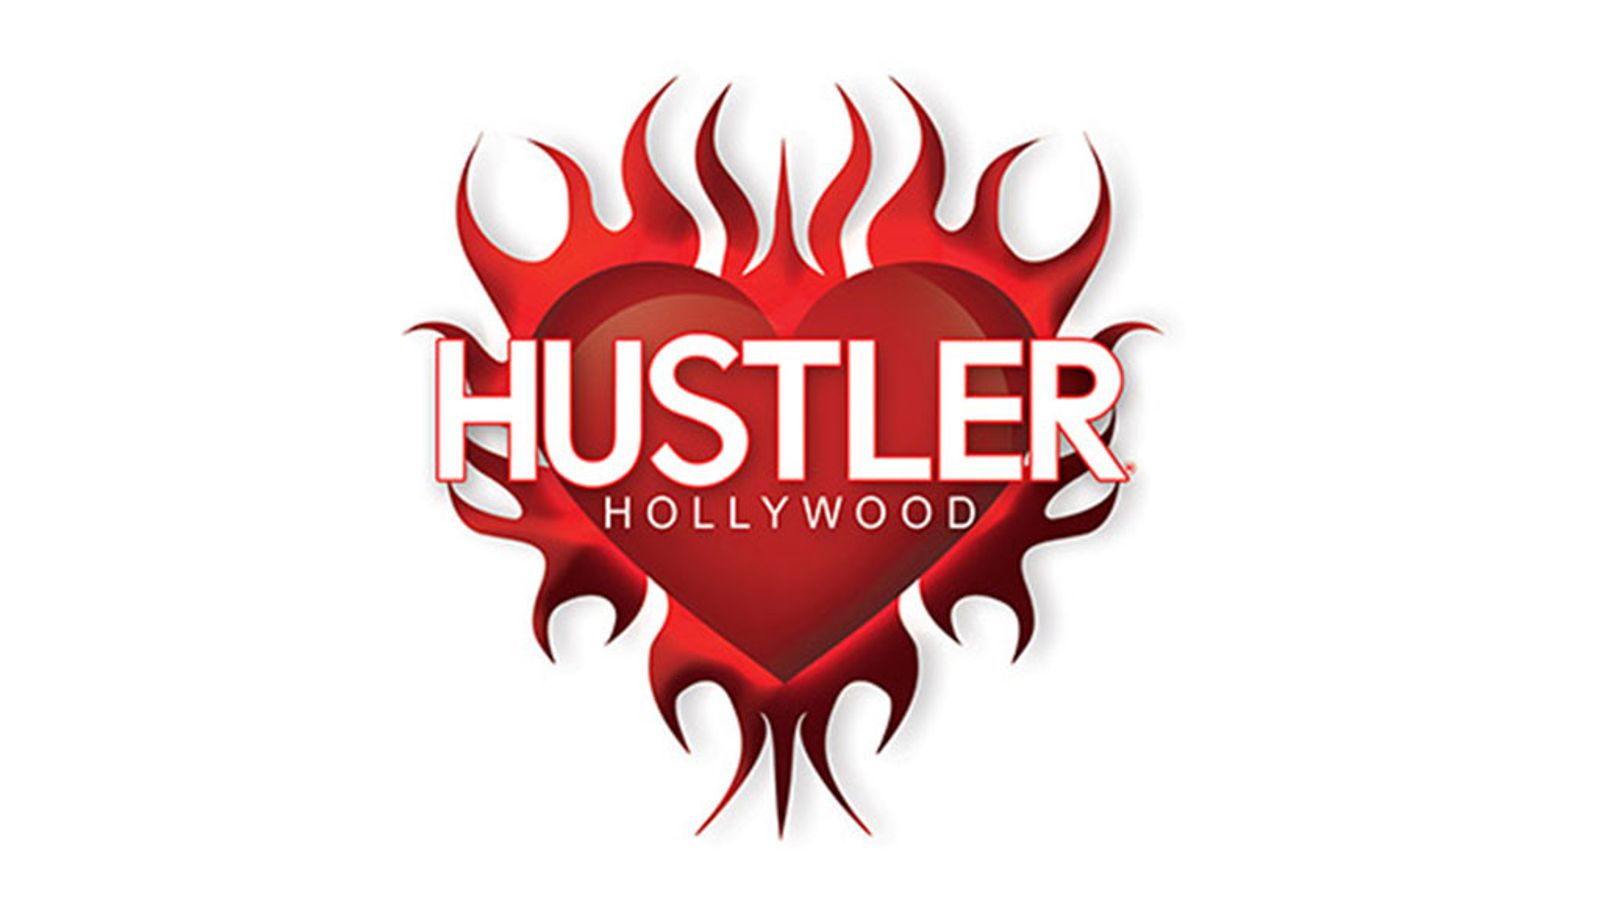 Hustler Hollywood Offers Curbside Pick-Up In Vegas, West Palm Bch